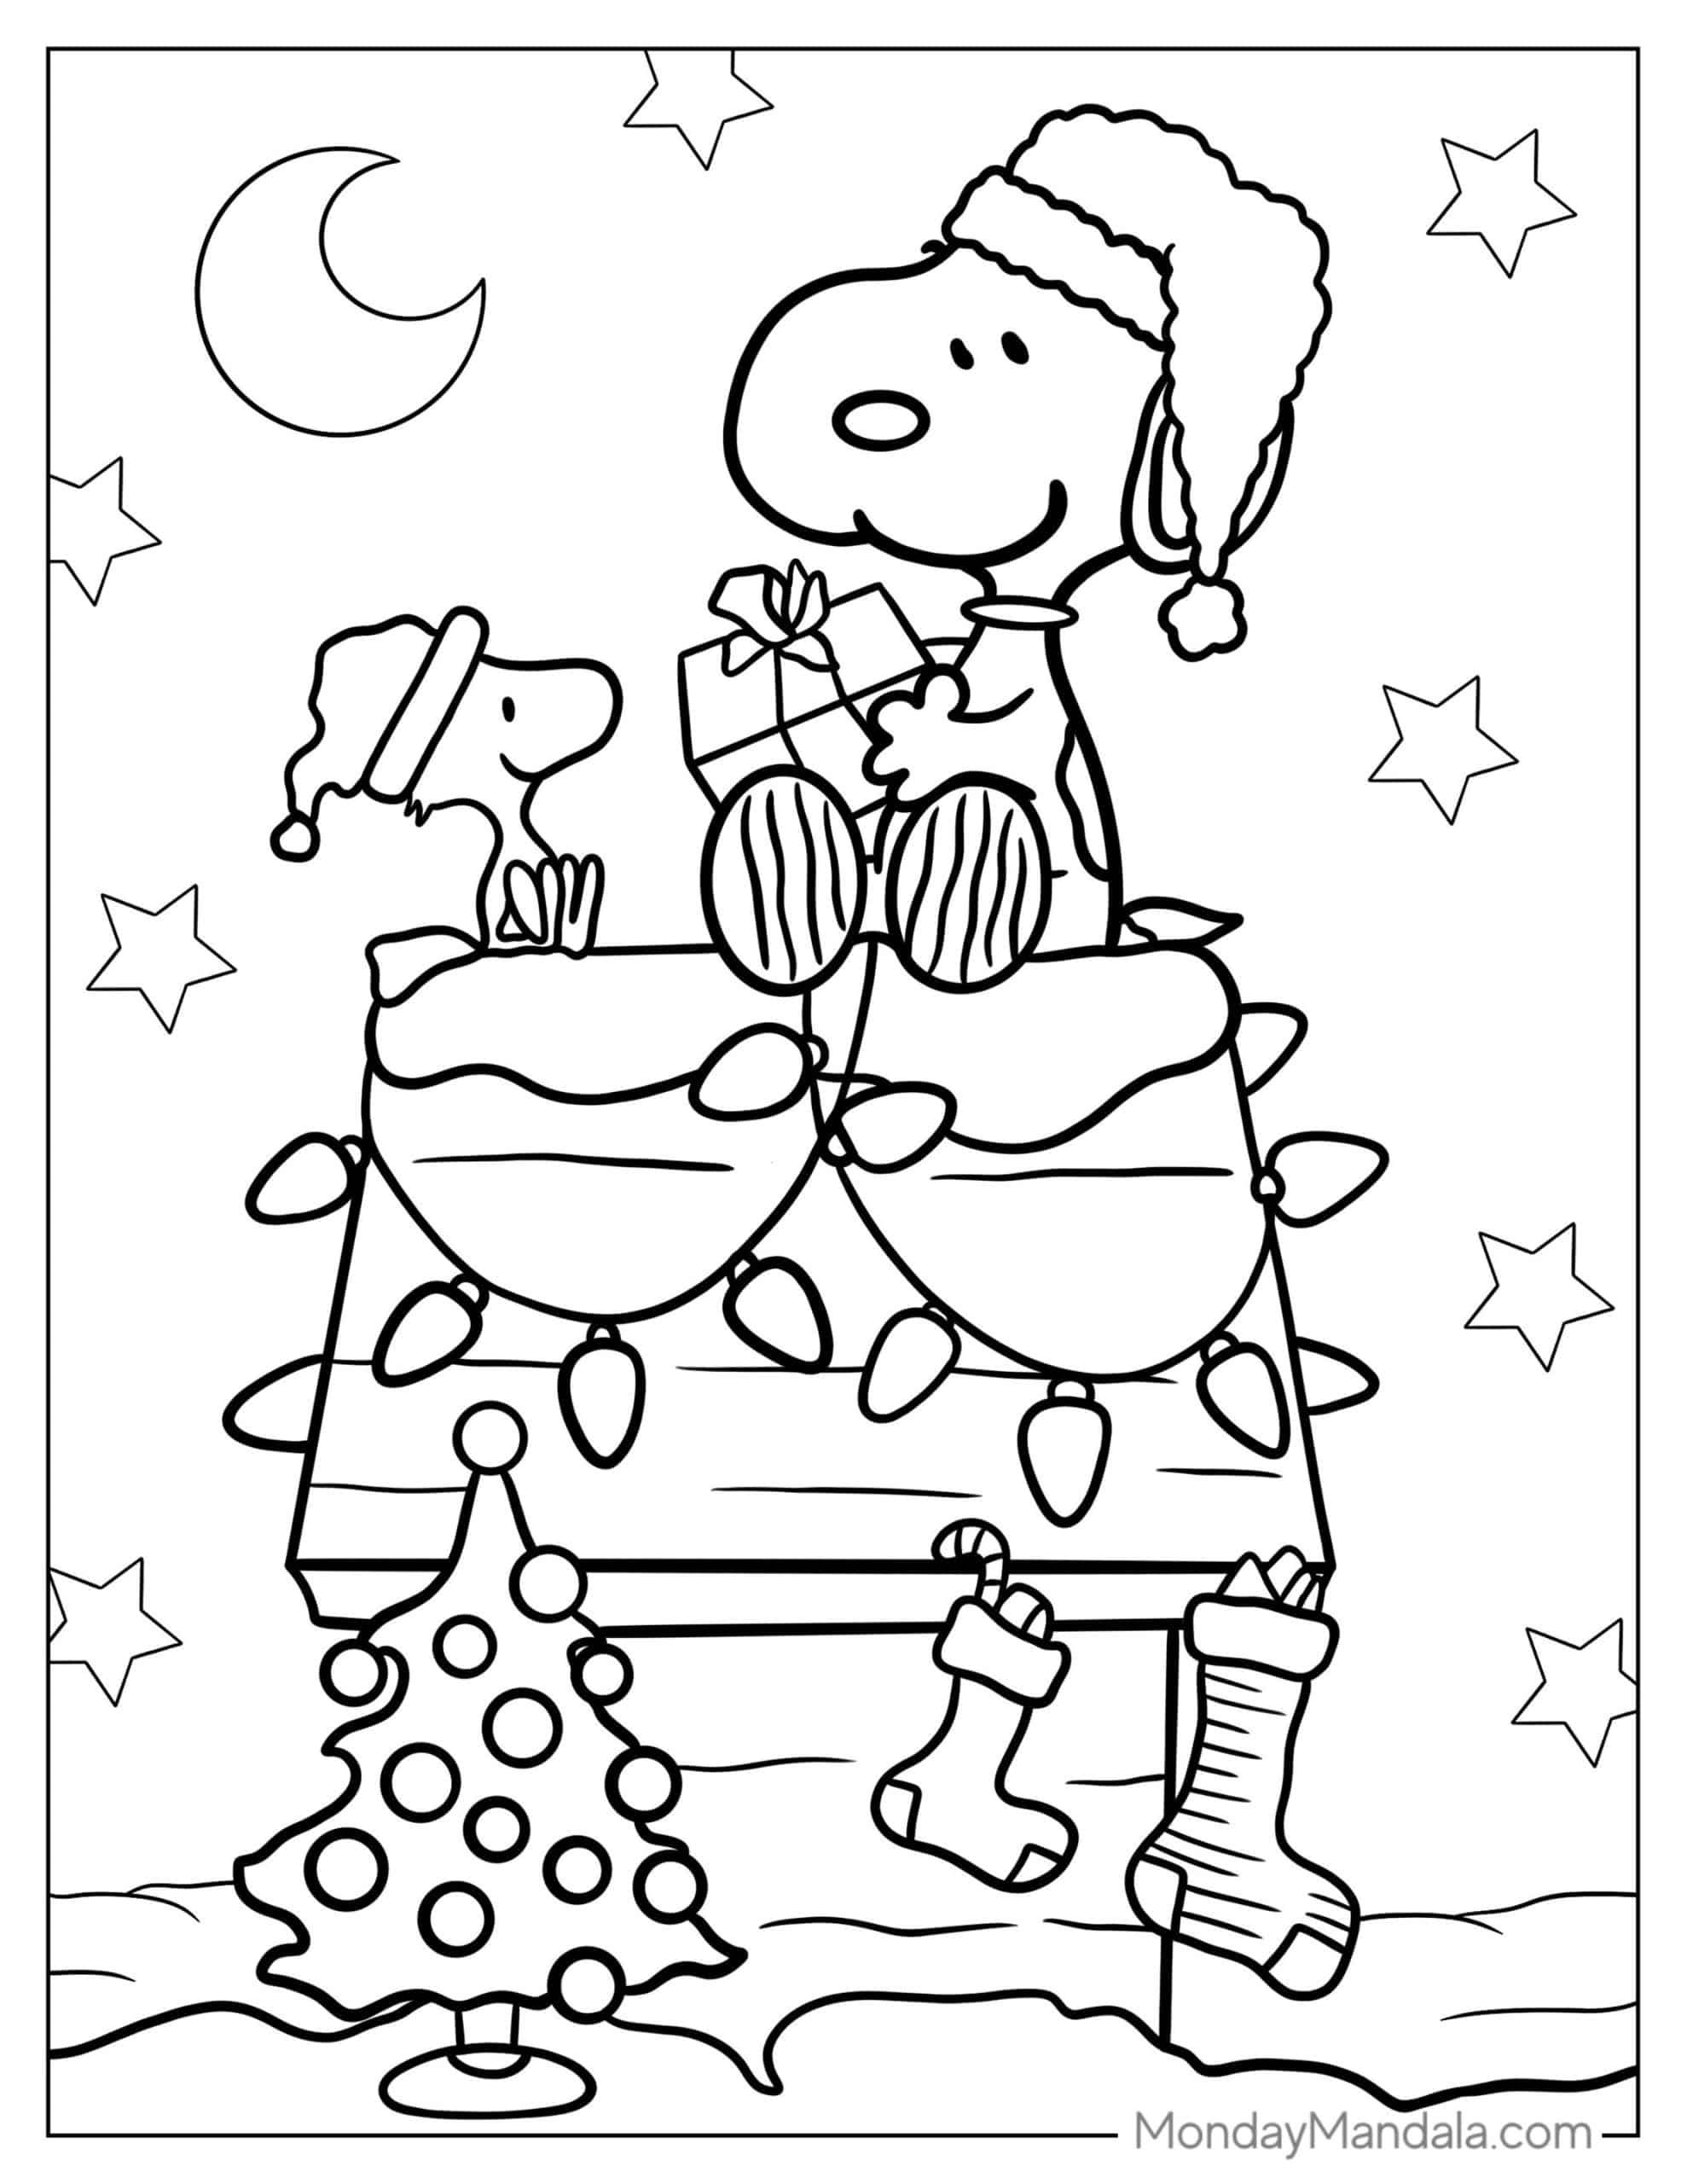 Peanuts snoopy coloring pages free pdf printables snoopy coloring pages hello kitty colouring pages printable christmas coloring pages